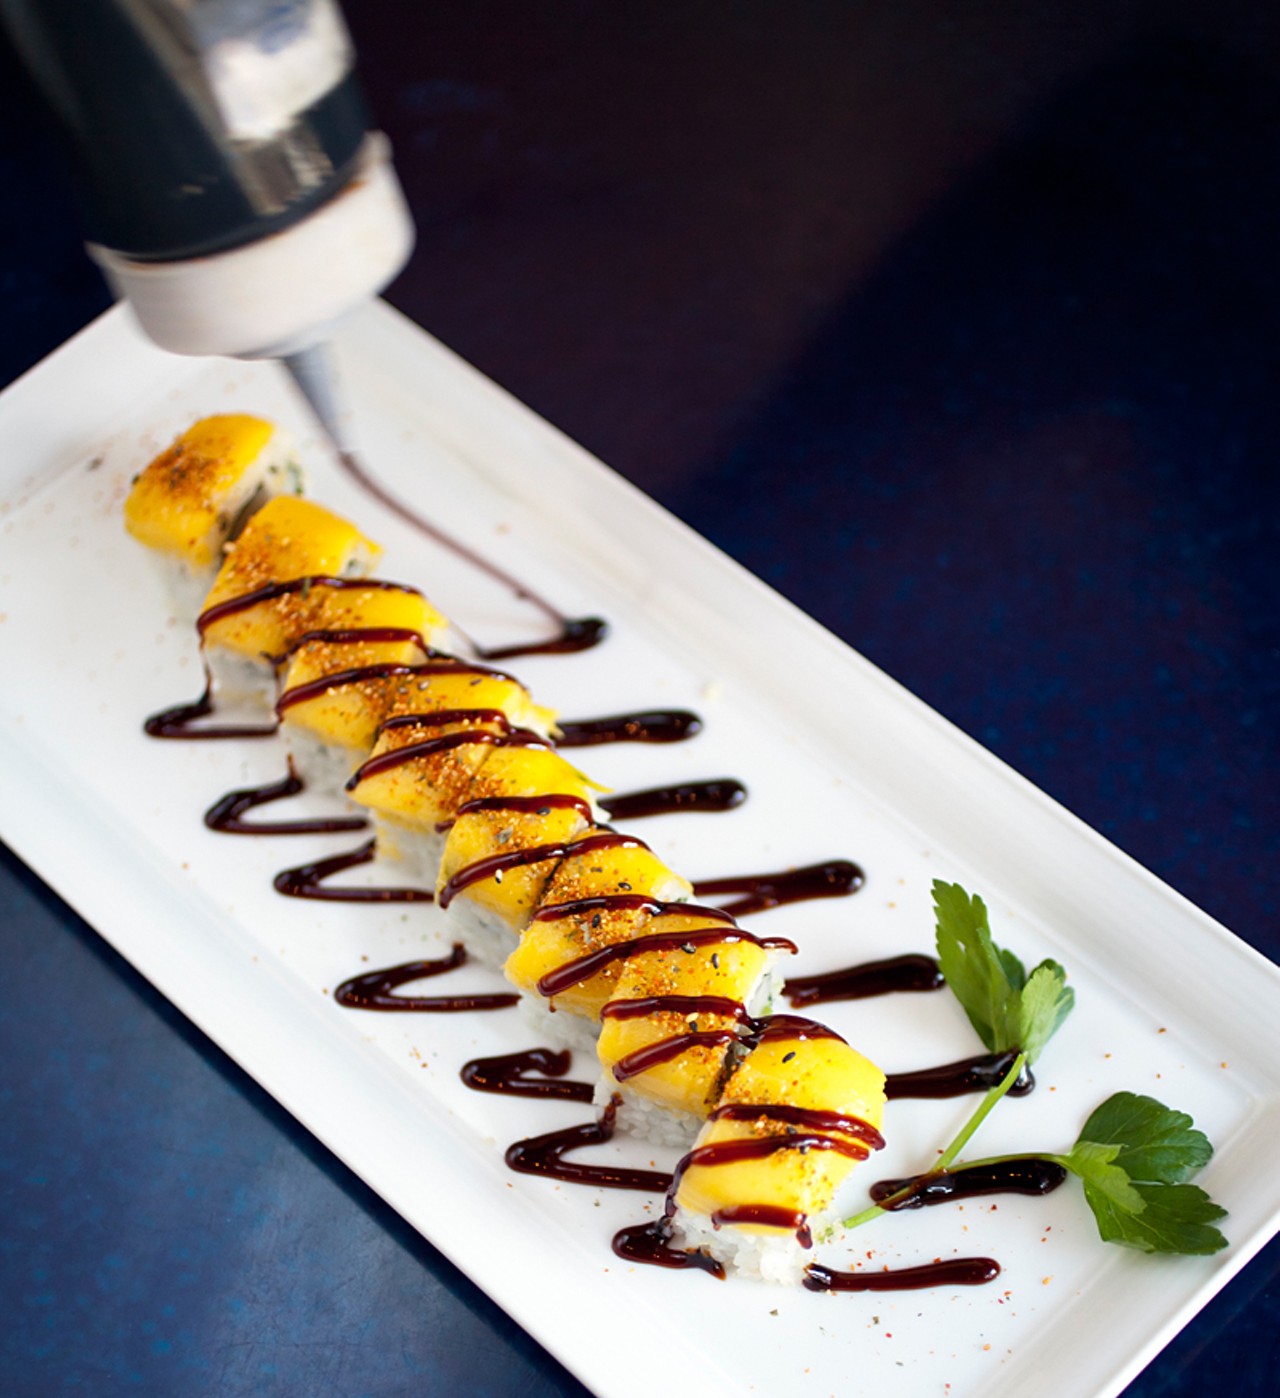 The Golden Child, one of Hiro's specialty rolls with white tuna, tempura crunch, avocado topped with mango and eel sauce.